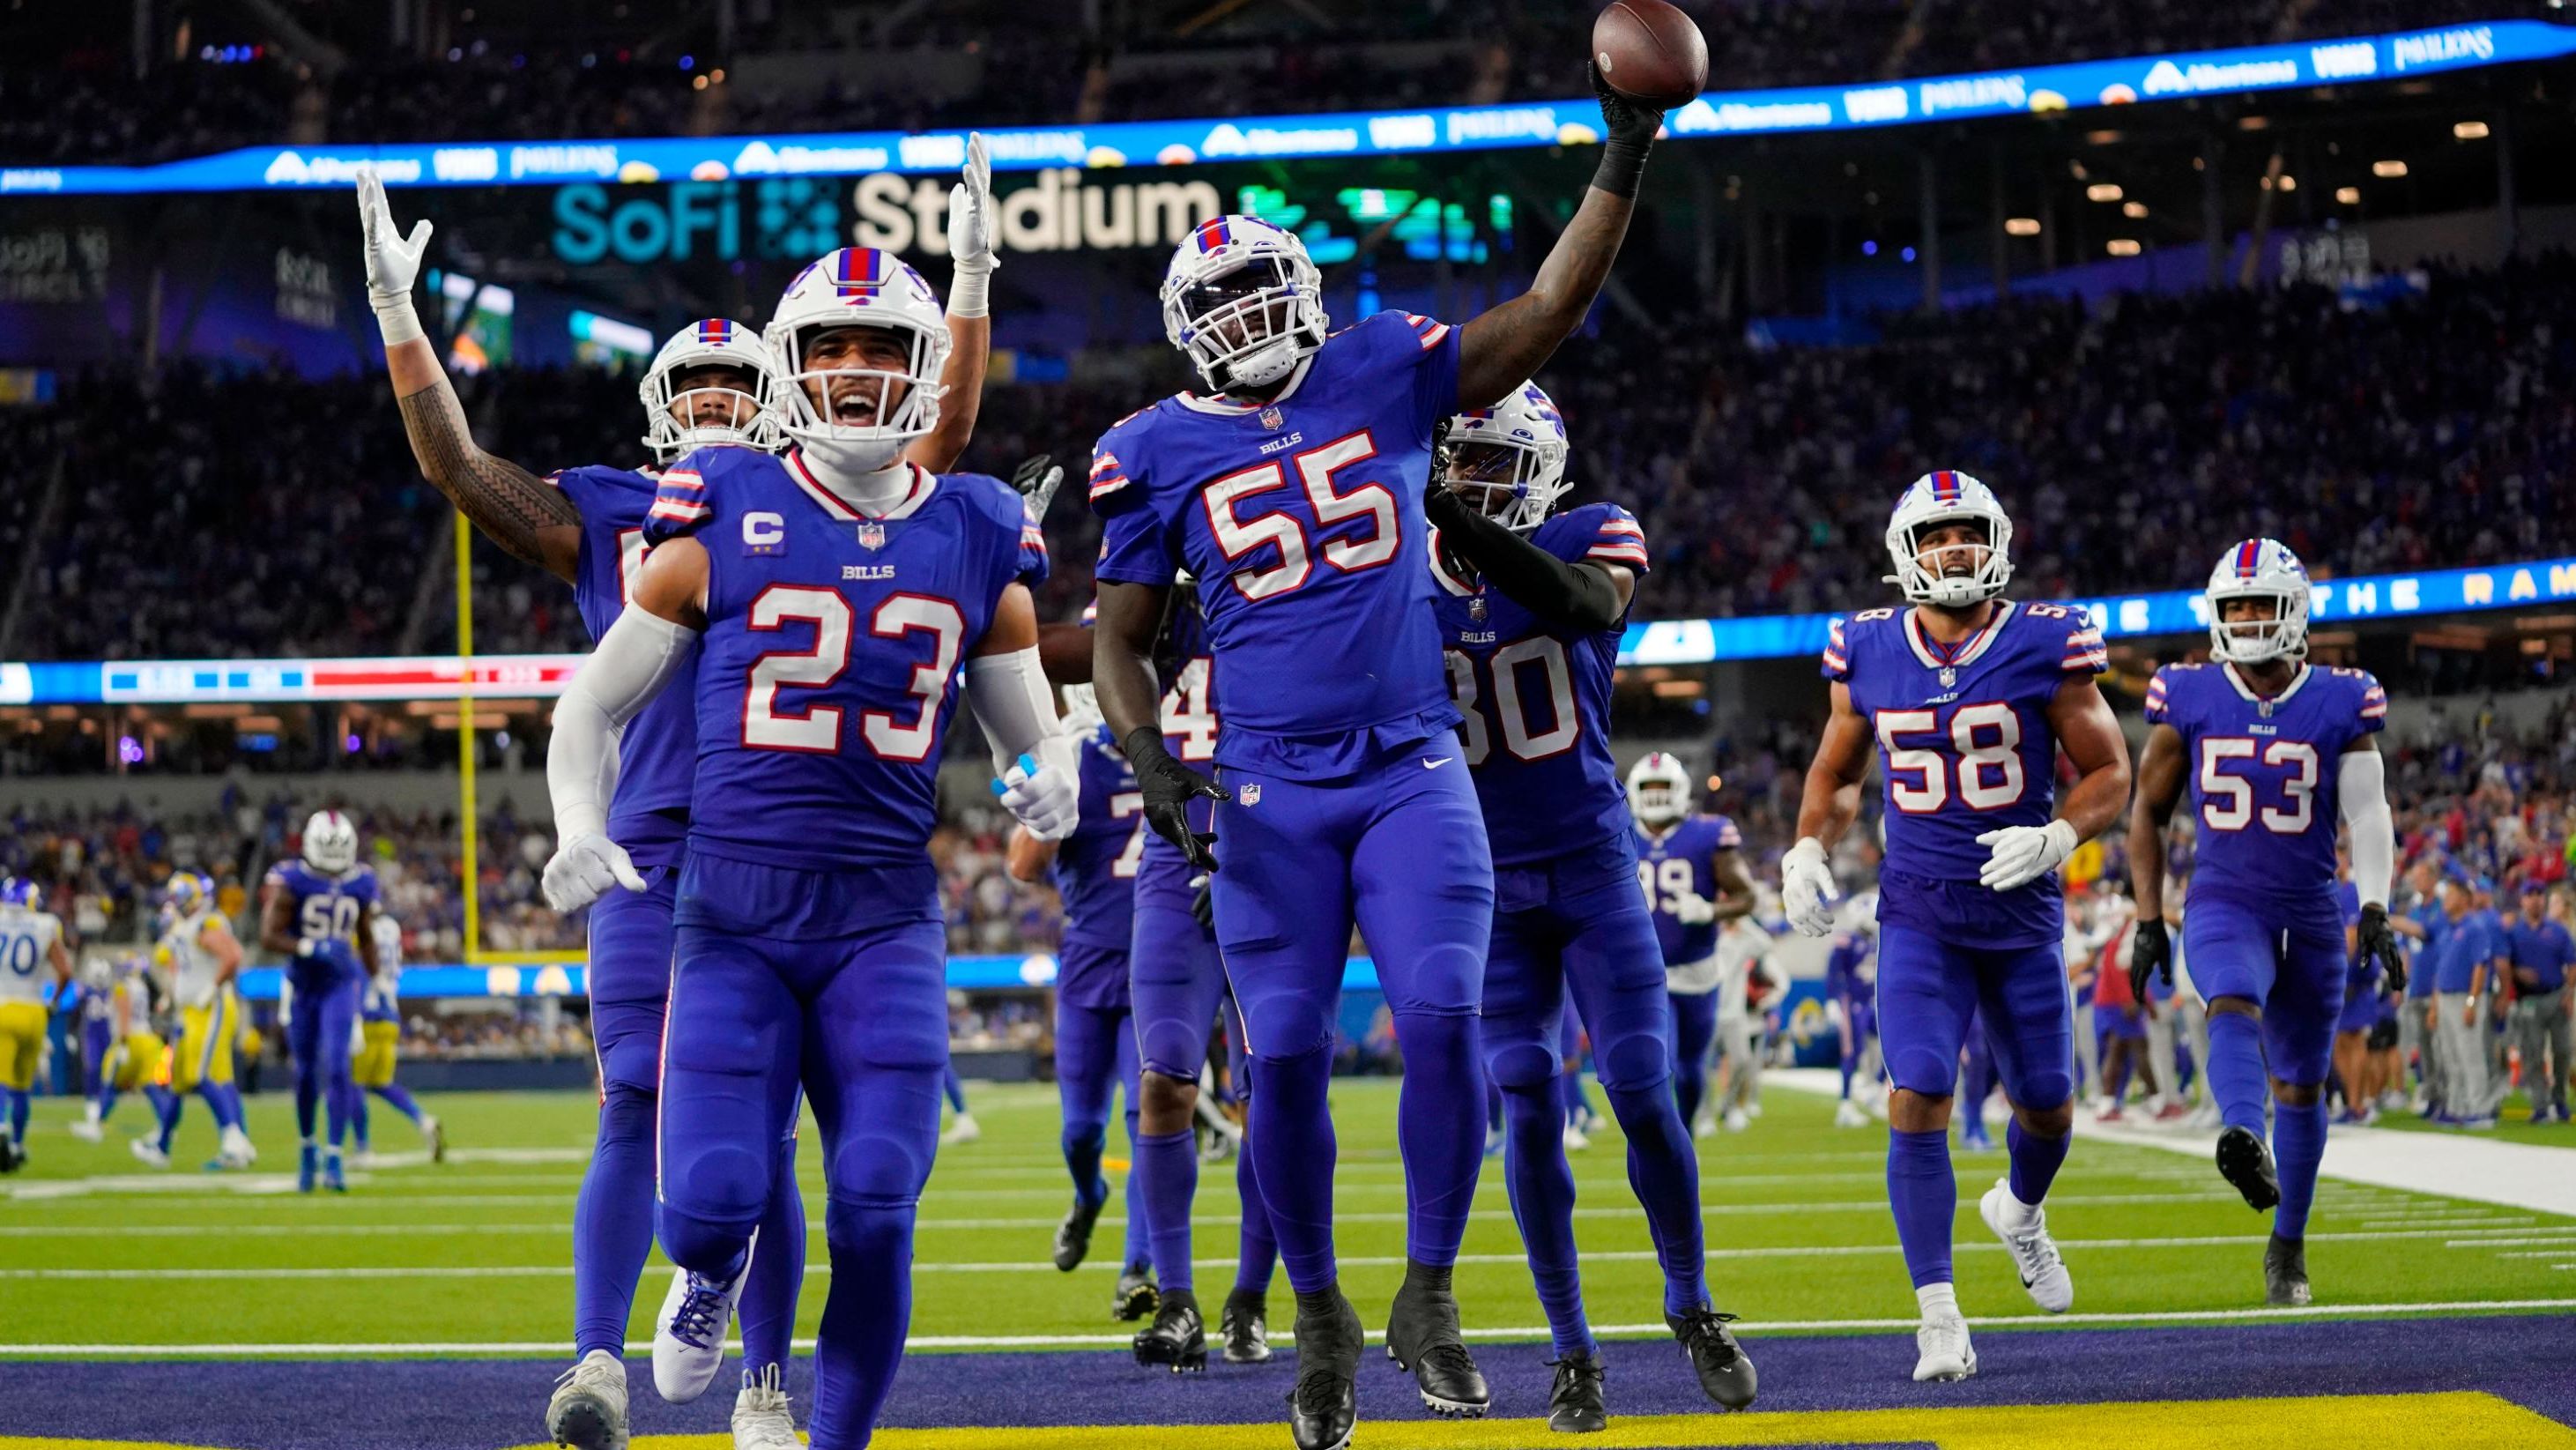 Members of the Buffalo Bills celebrate after Boogie Basham (No. 55) intercepted a pass in the team's win over the Los Angeles Rams on Thursday, September 8. The Bills knocked off the defending champions 31-10 in what was the first game of the regular season.